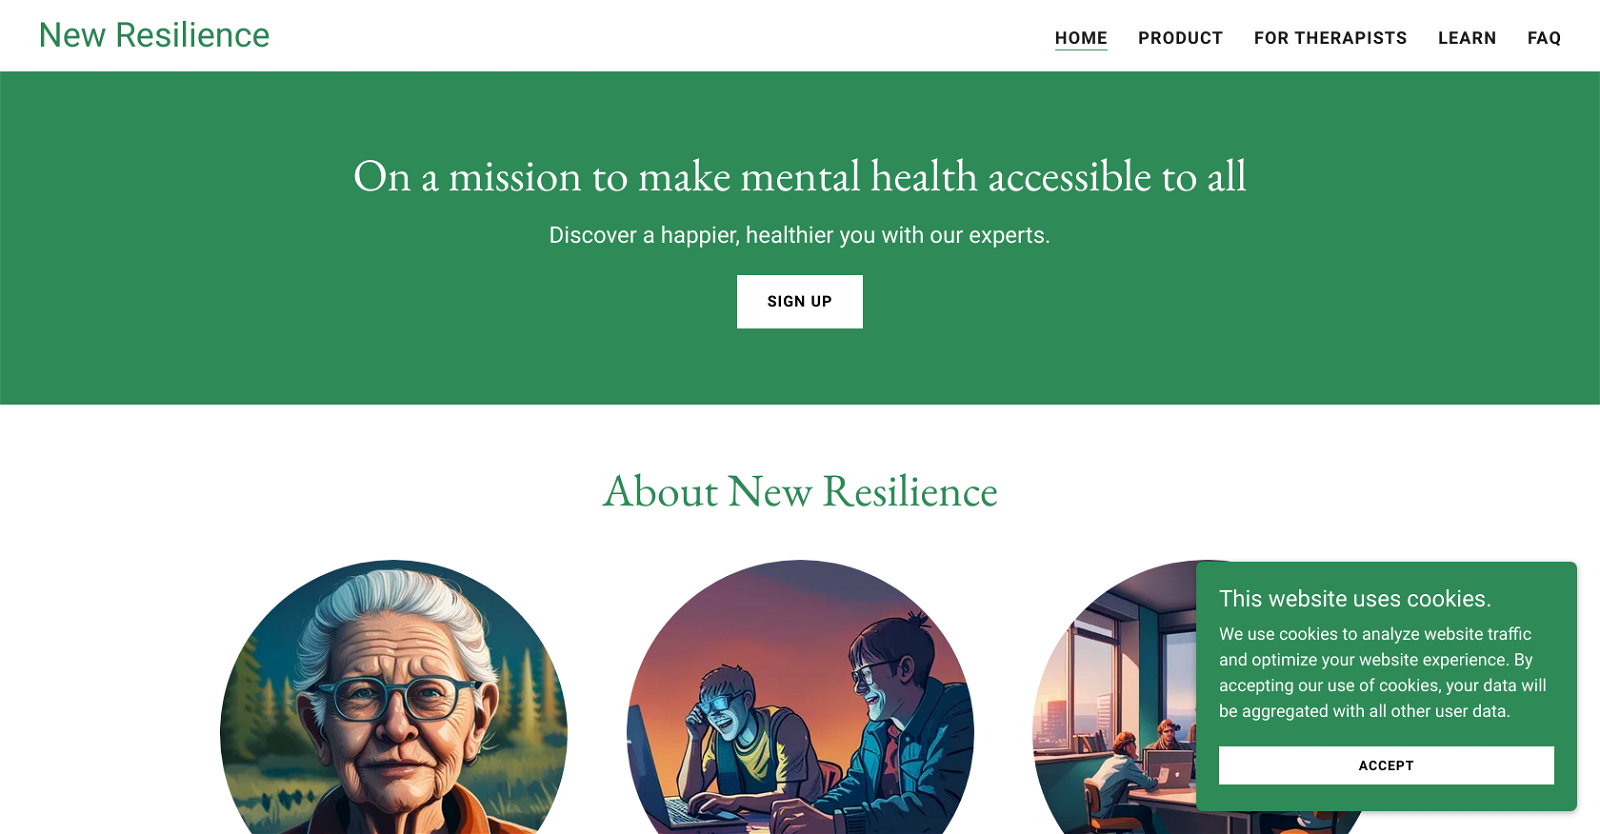 New Resilience website